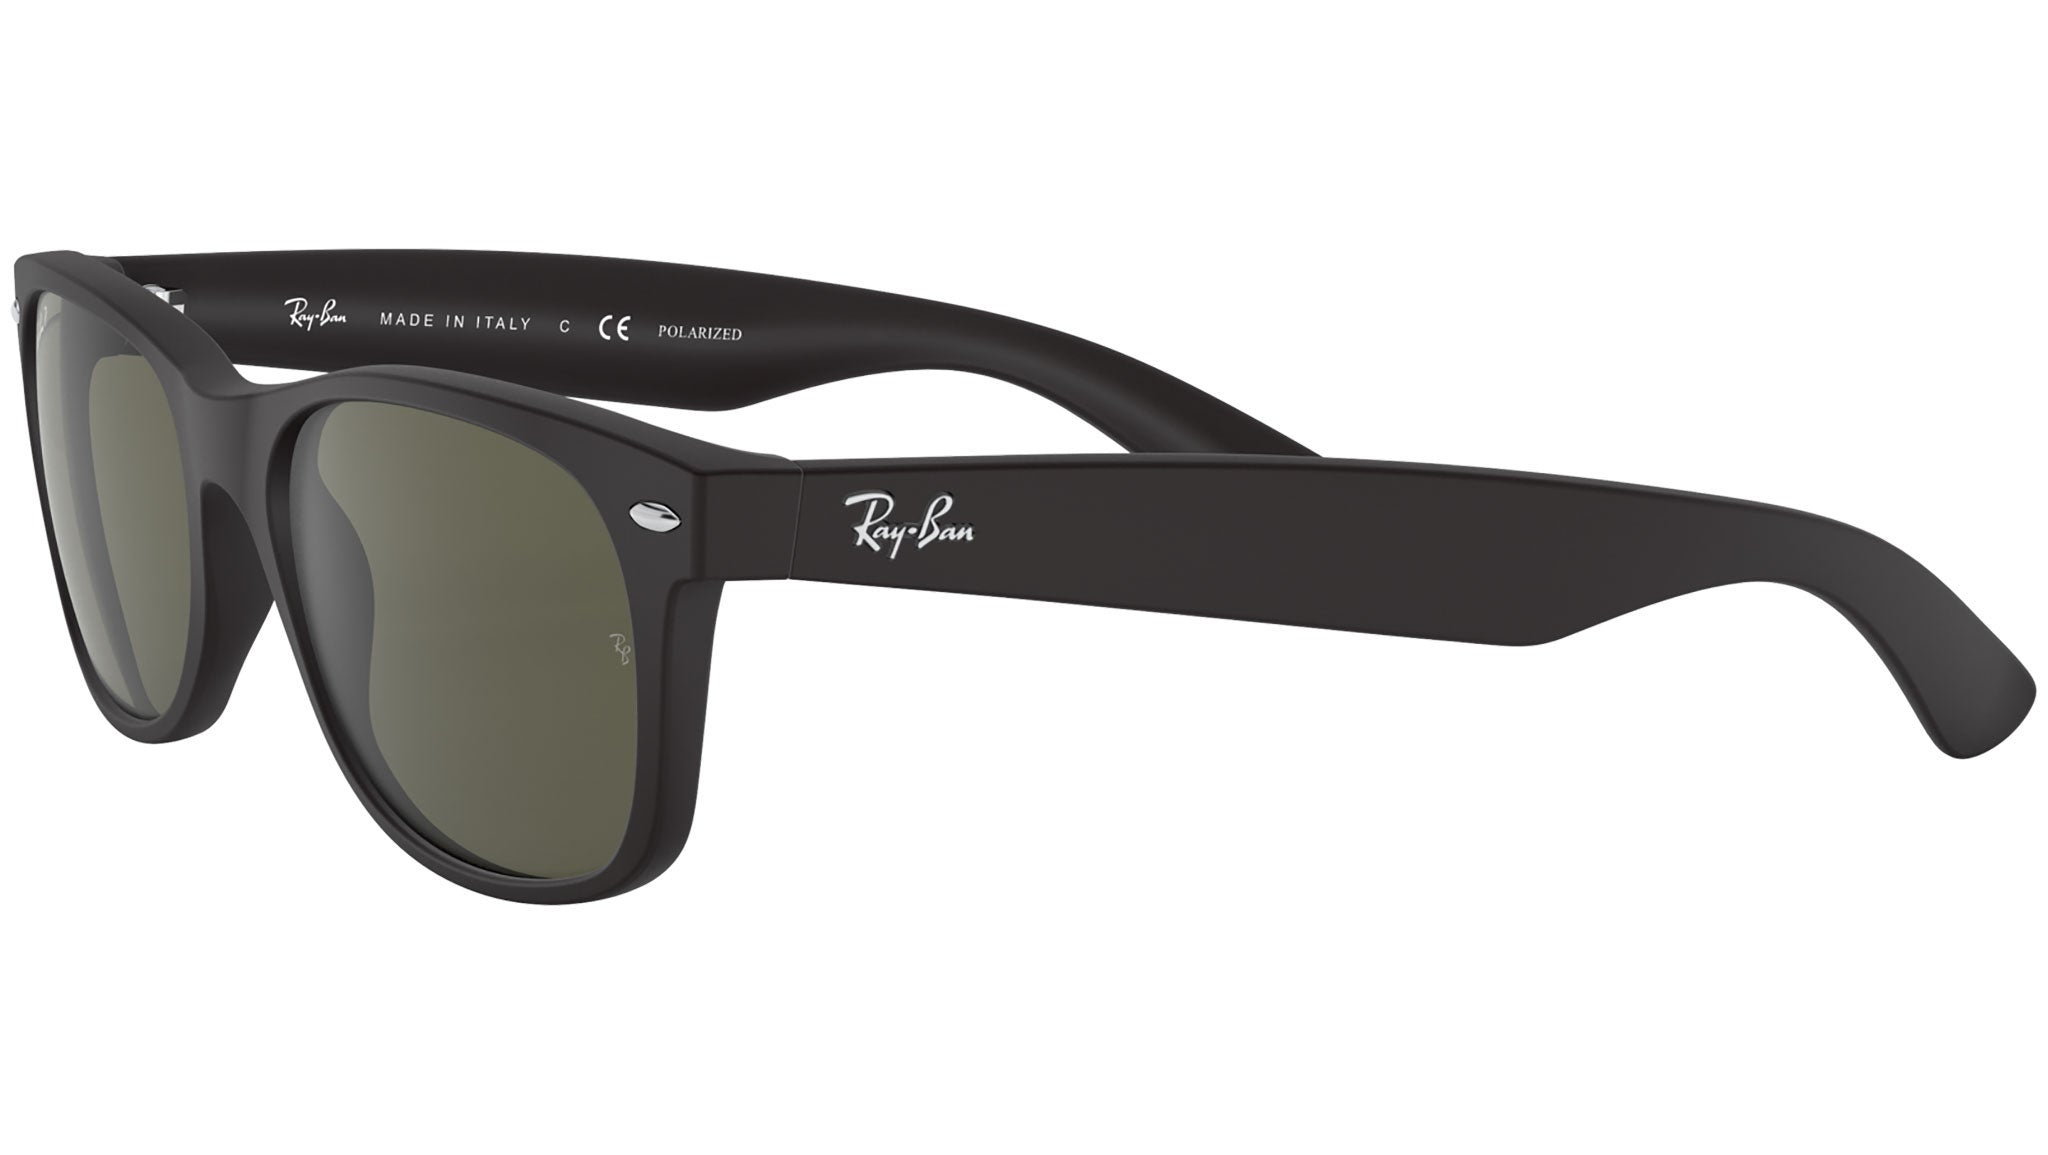 Difference between Ray-Ban Matte Black vs. Black - YouTube